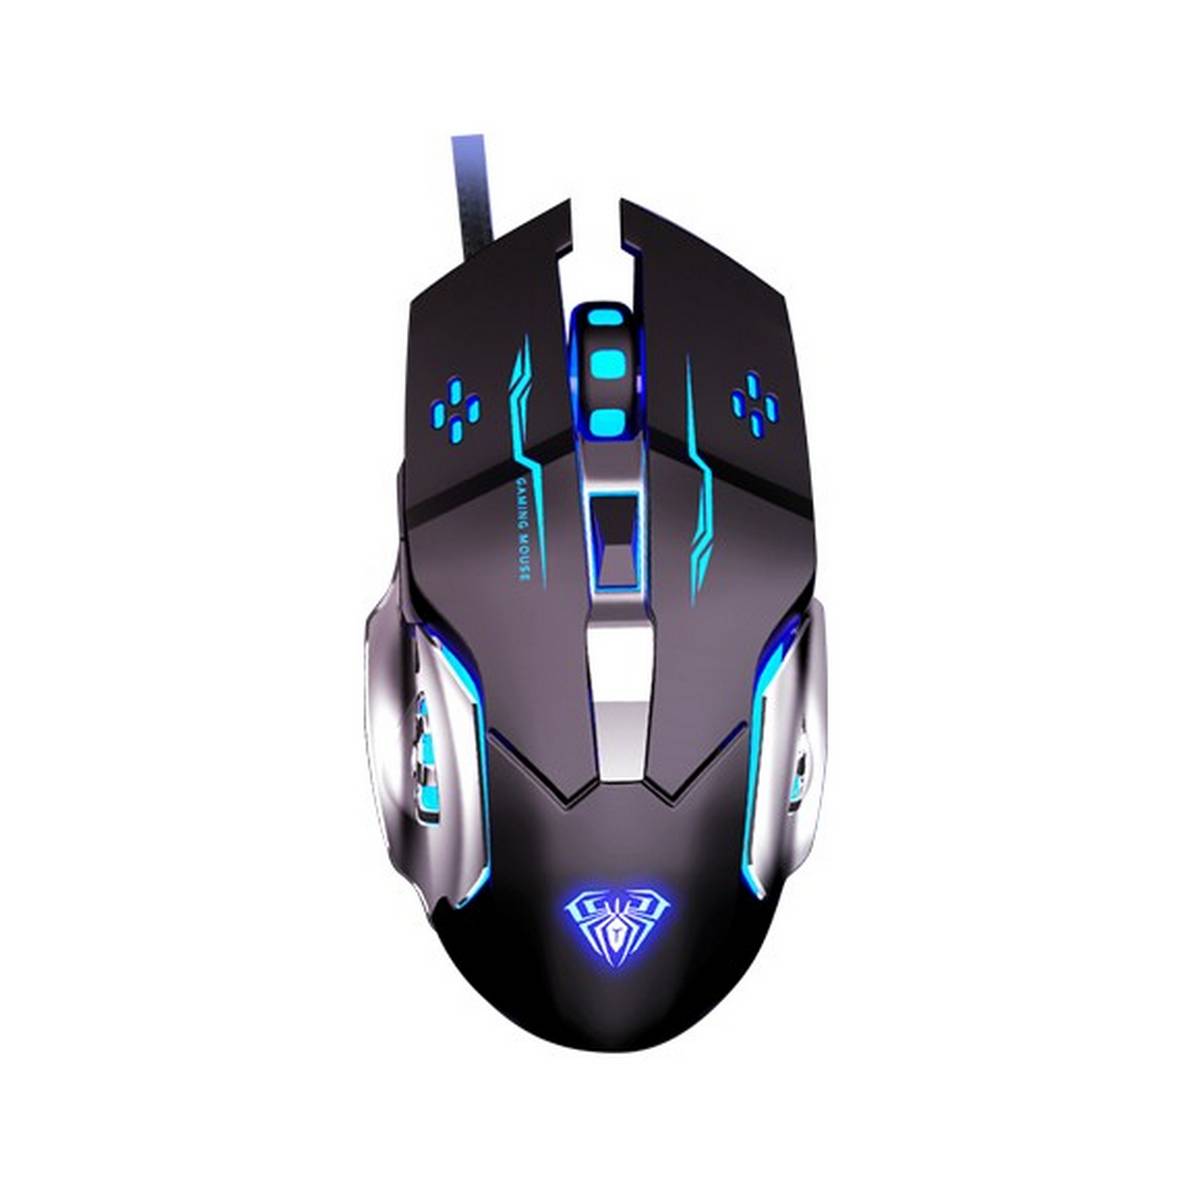 aula gaming mouse button layout